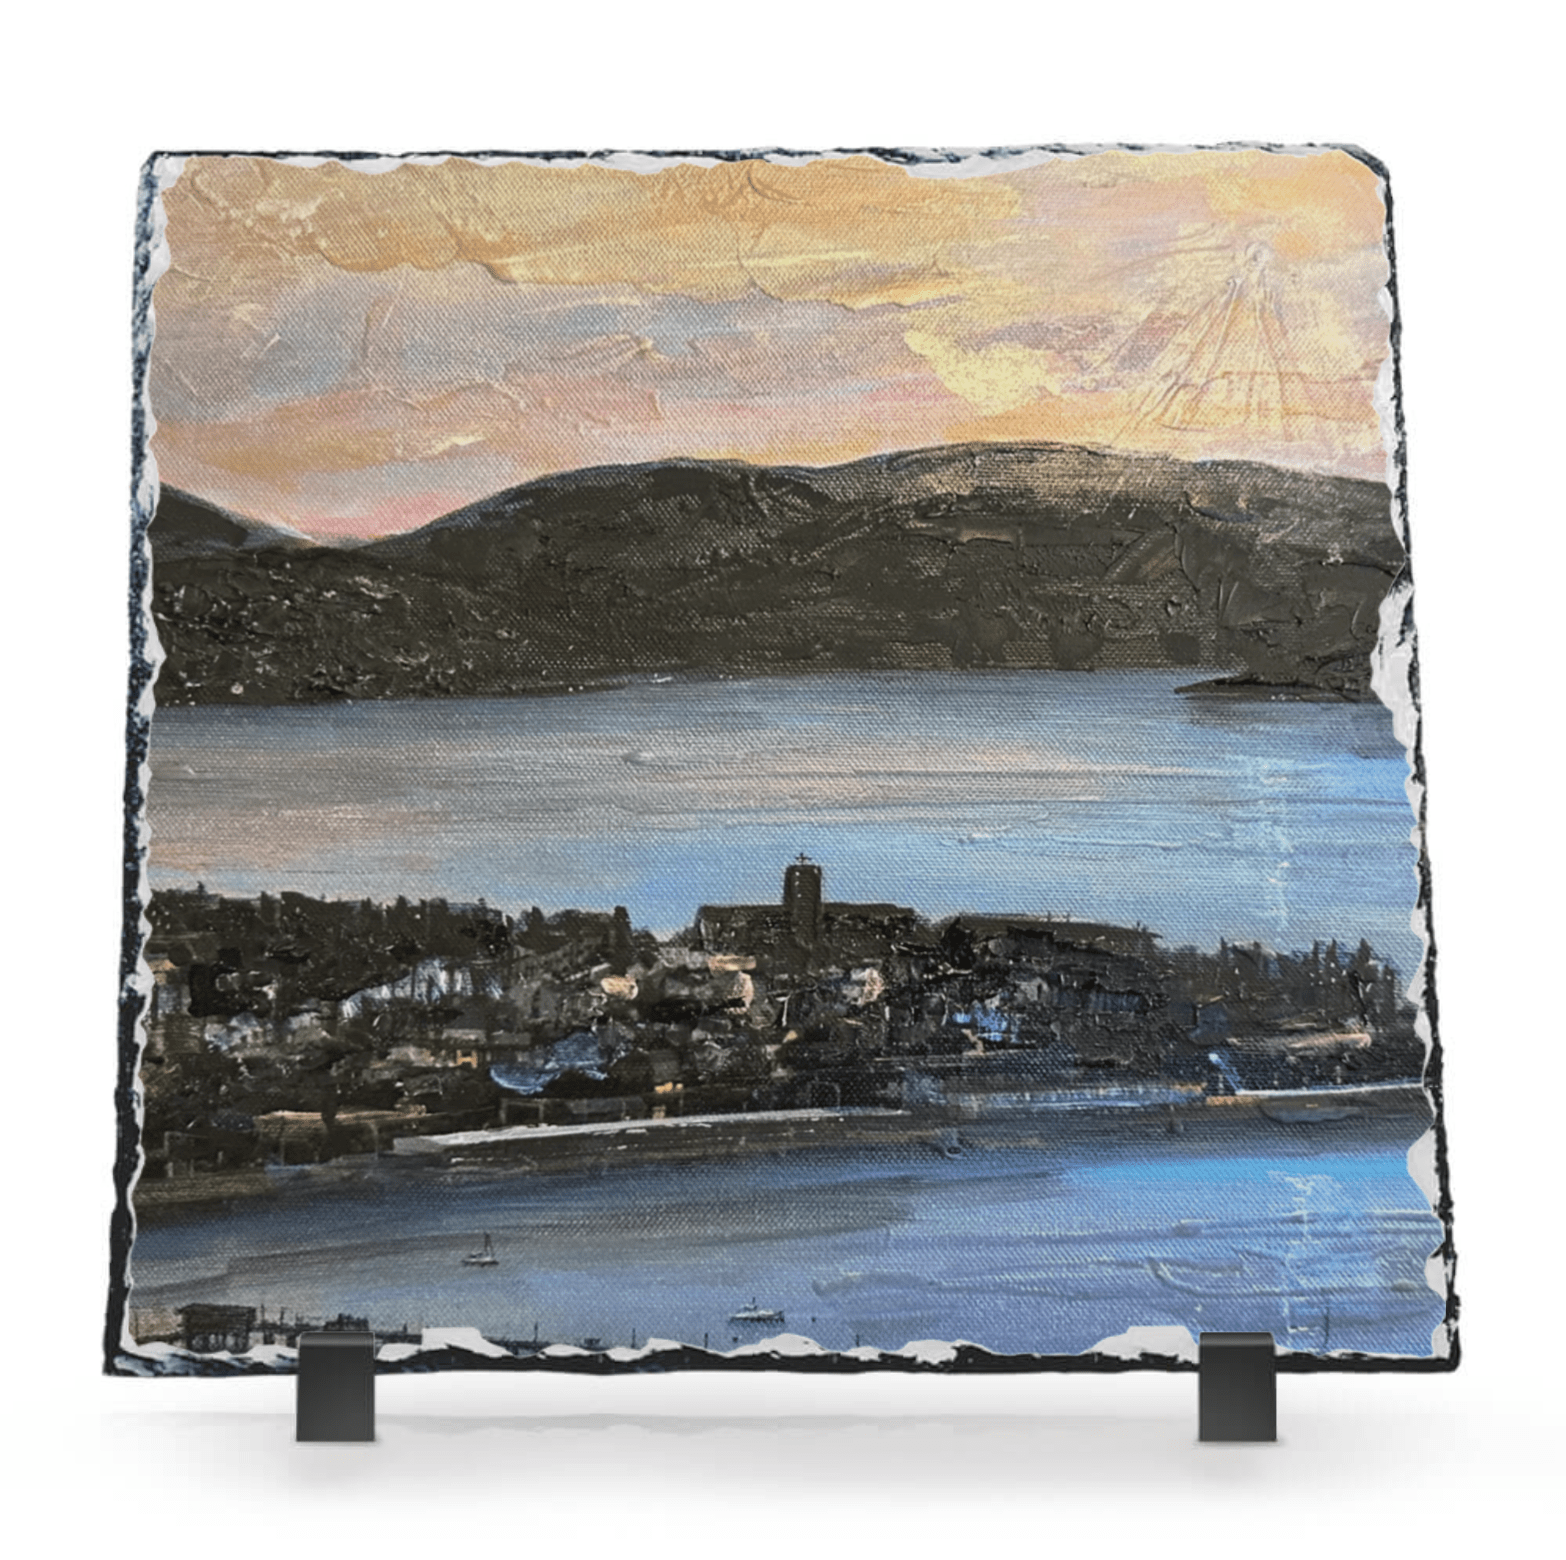 From Lyle Hill Slate Art-Slate Art-River Clyde Art Gallery-Paintings, Prints, Homeware, Art Gifts From Scotland By Scottish Artist Kevin Hunter